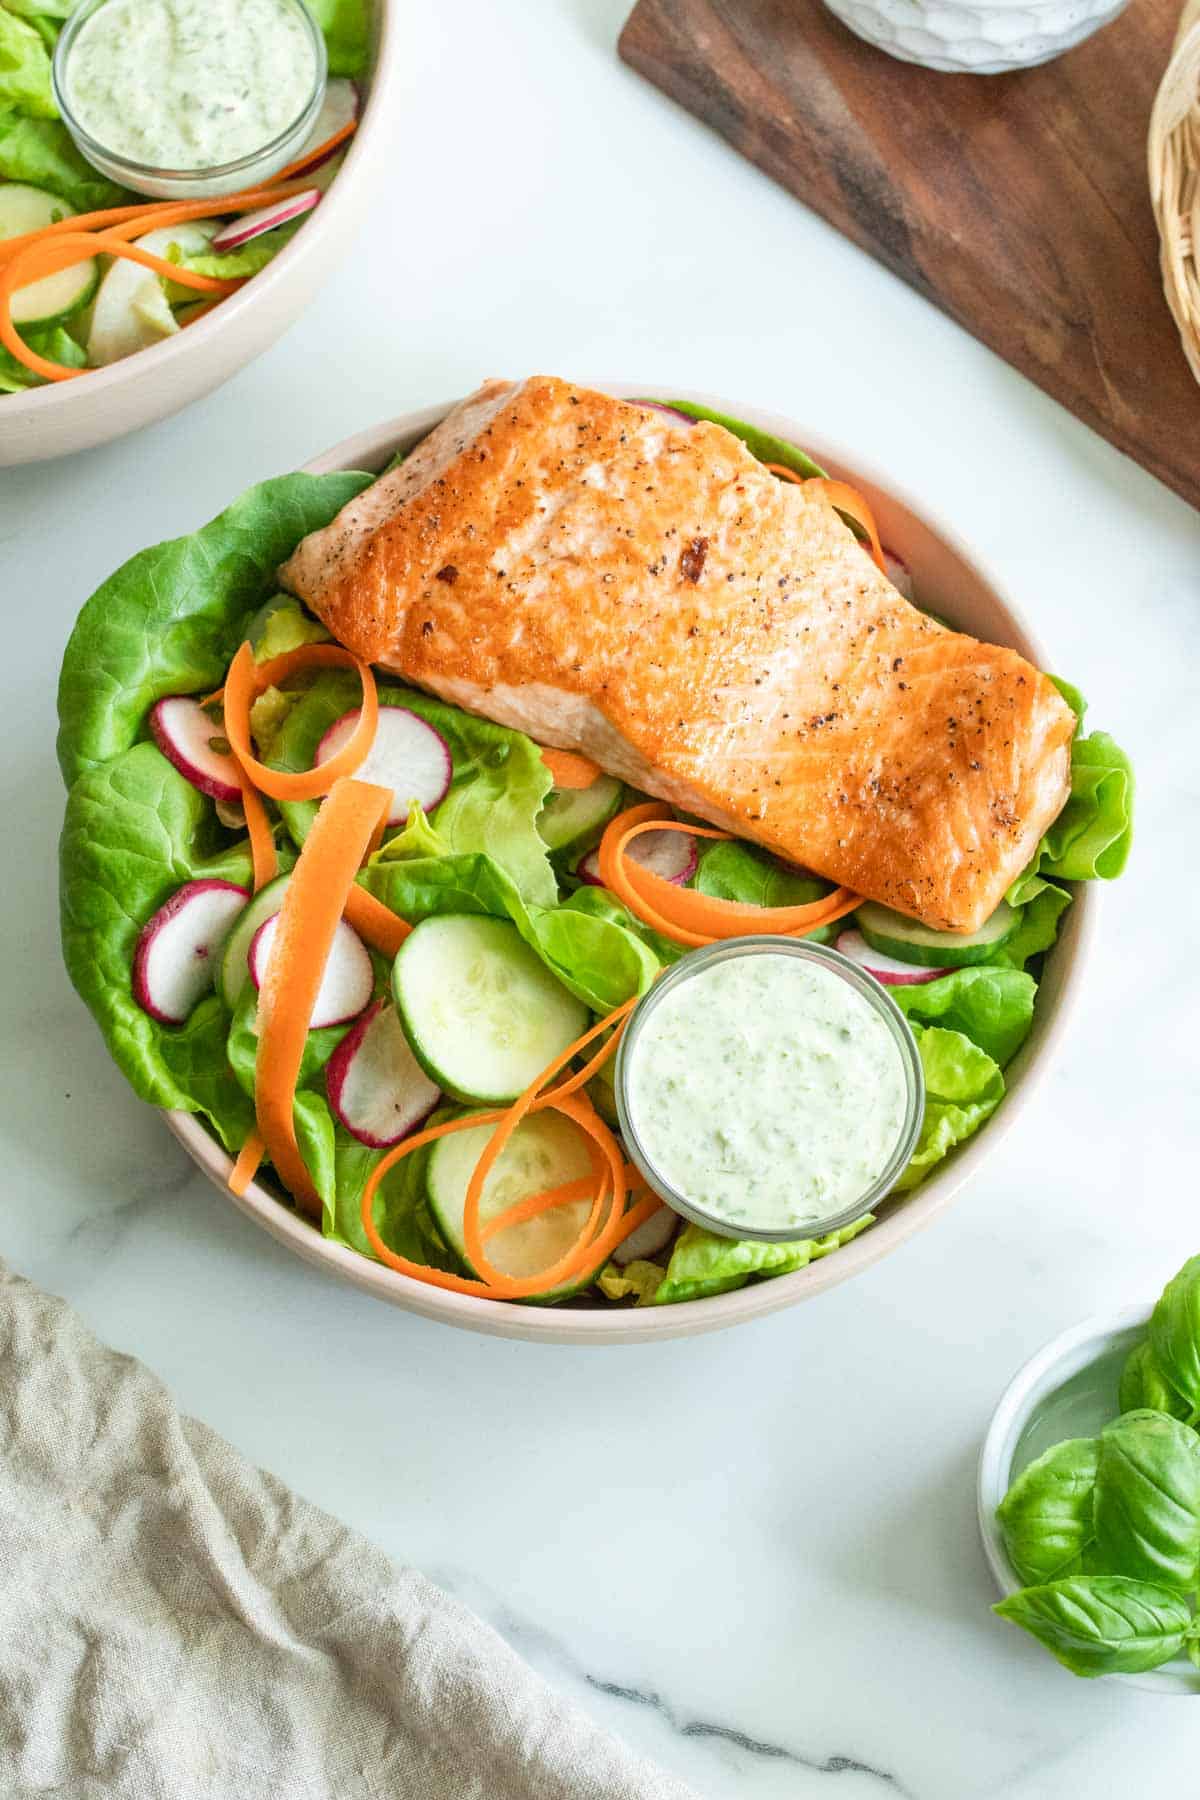 Seared salmon on top of a bibb lettuce salad with carrots and cucumber, next to a wood cutting board.